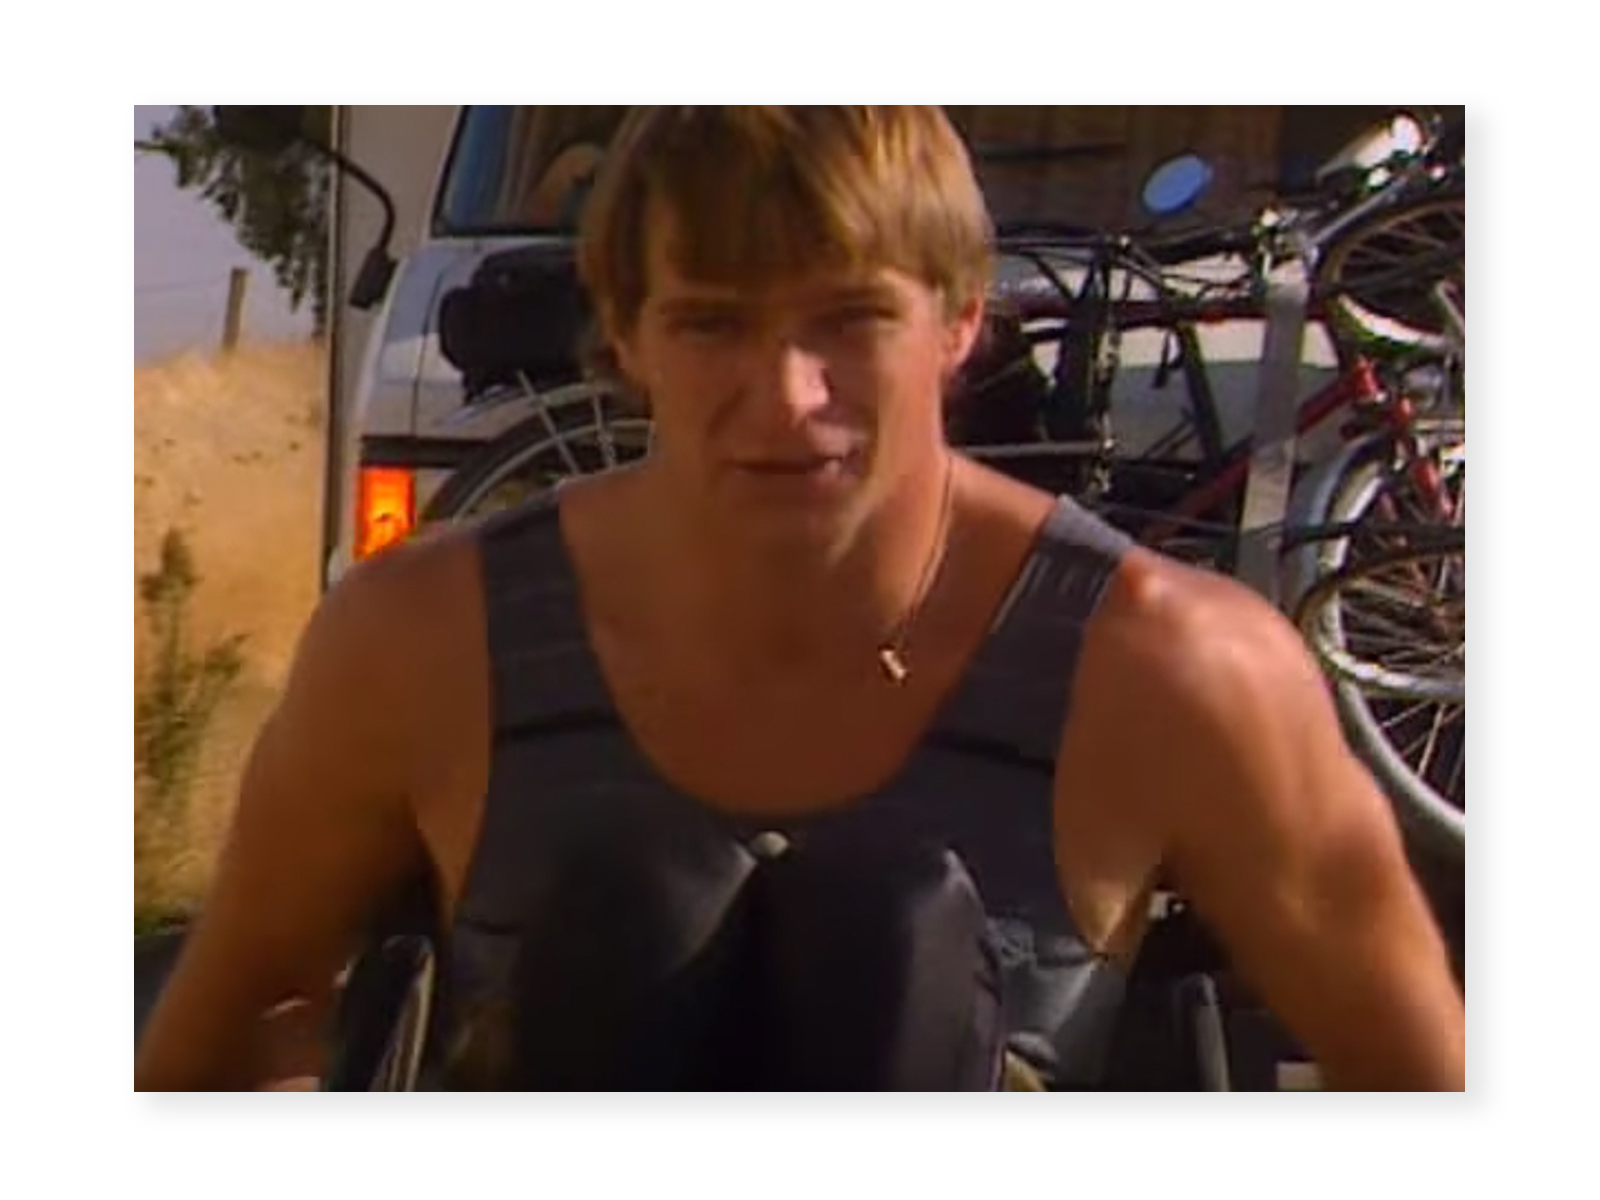 Screenshot from "Power of the Dream" video - a close up of Rick Hansen wheeling during the Man In Motion World Tour, wearing a black shirt and pants. Behind him the front of the Tour motorhome can be seen.